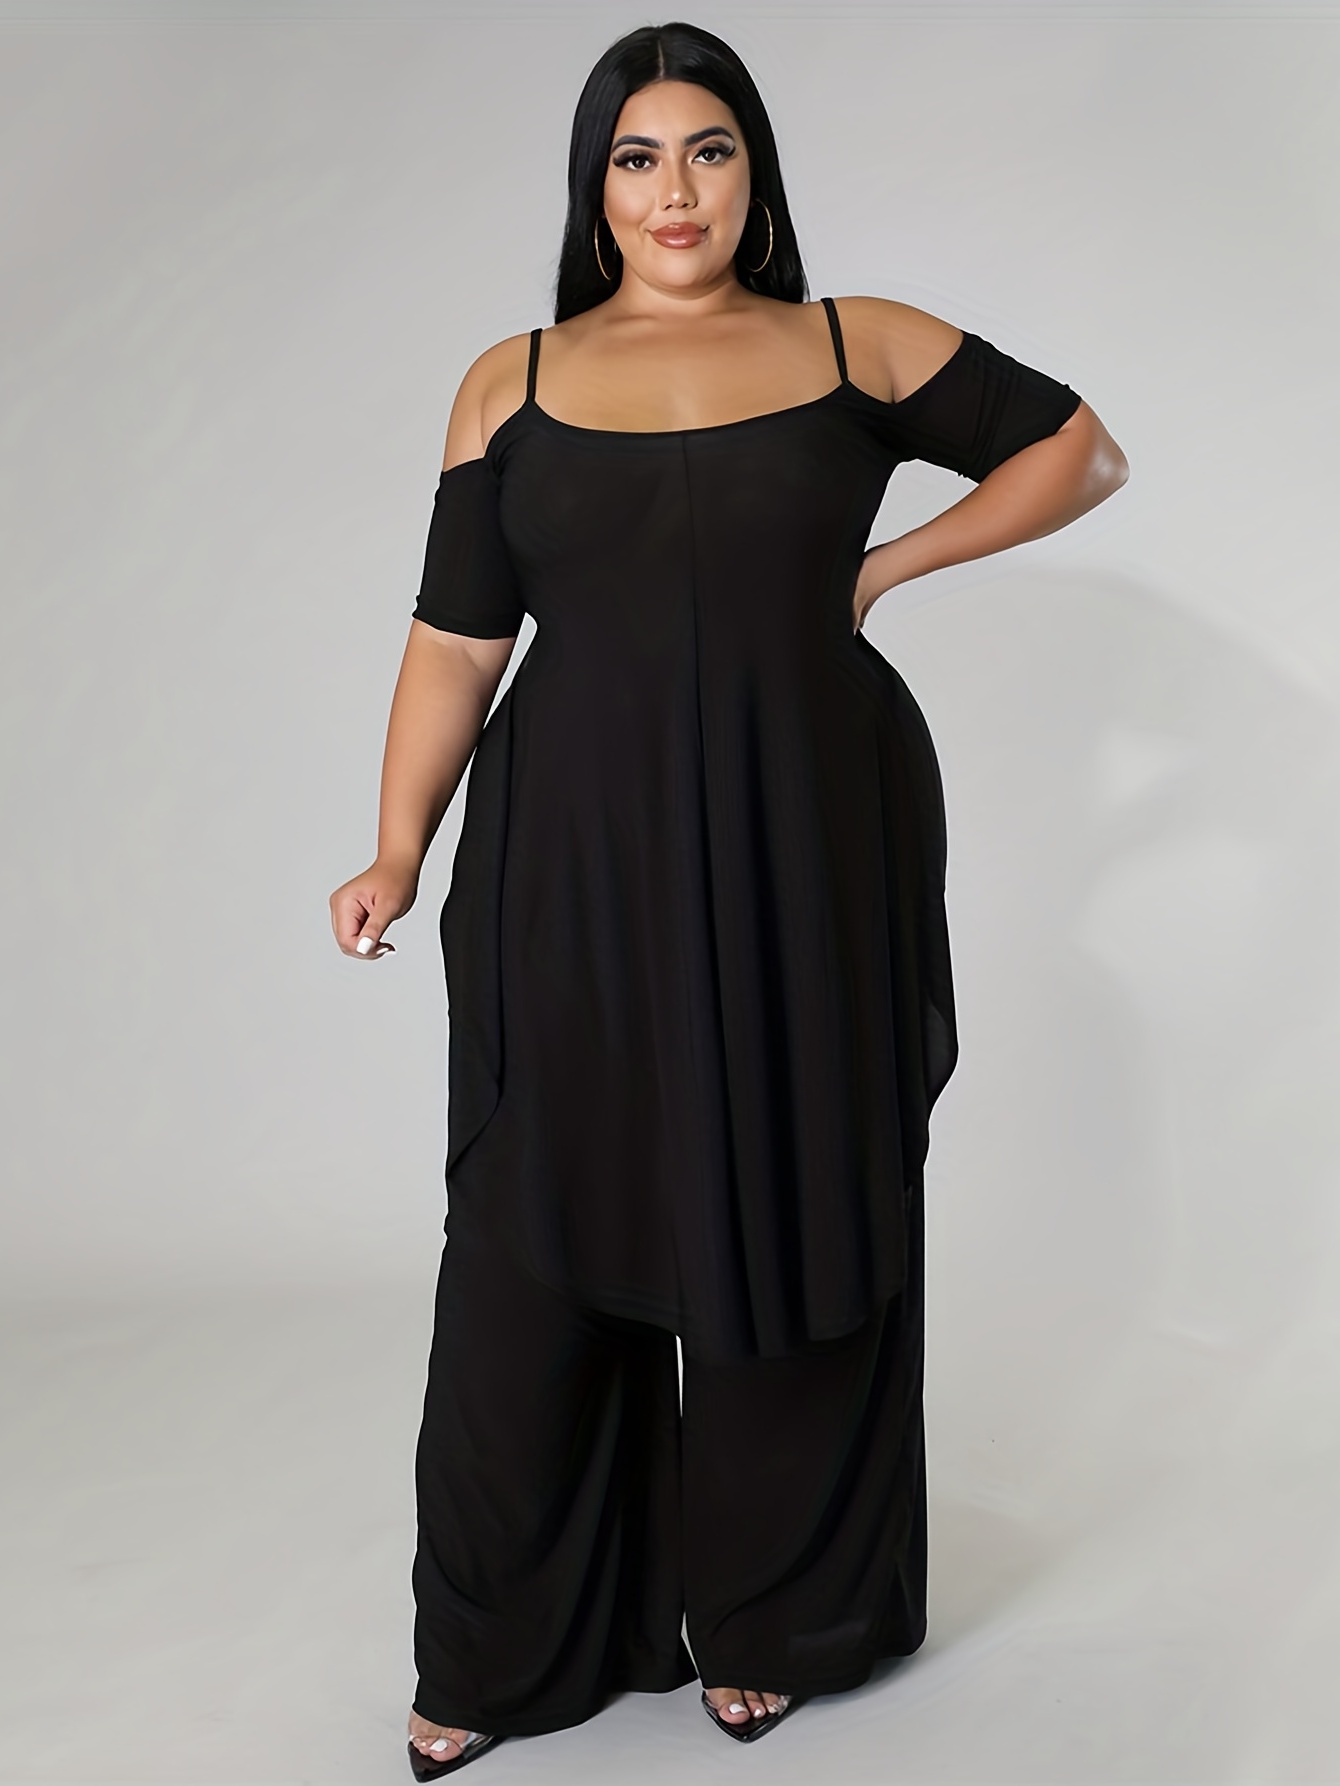 Sexy plus size outfits